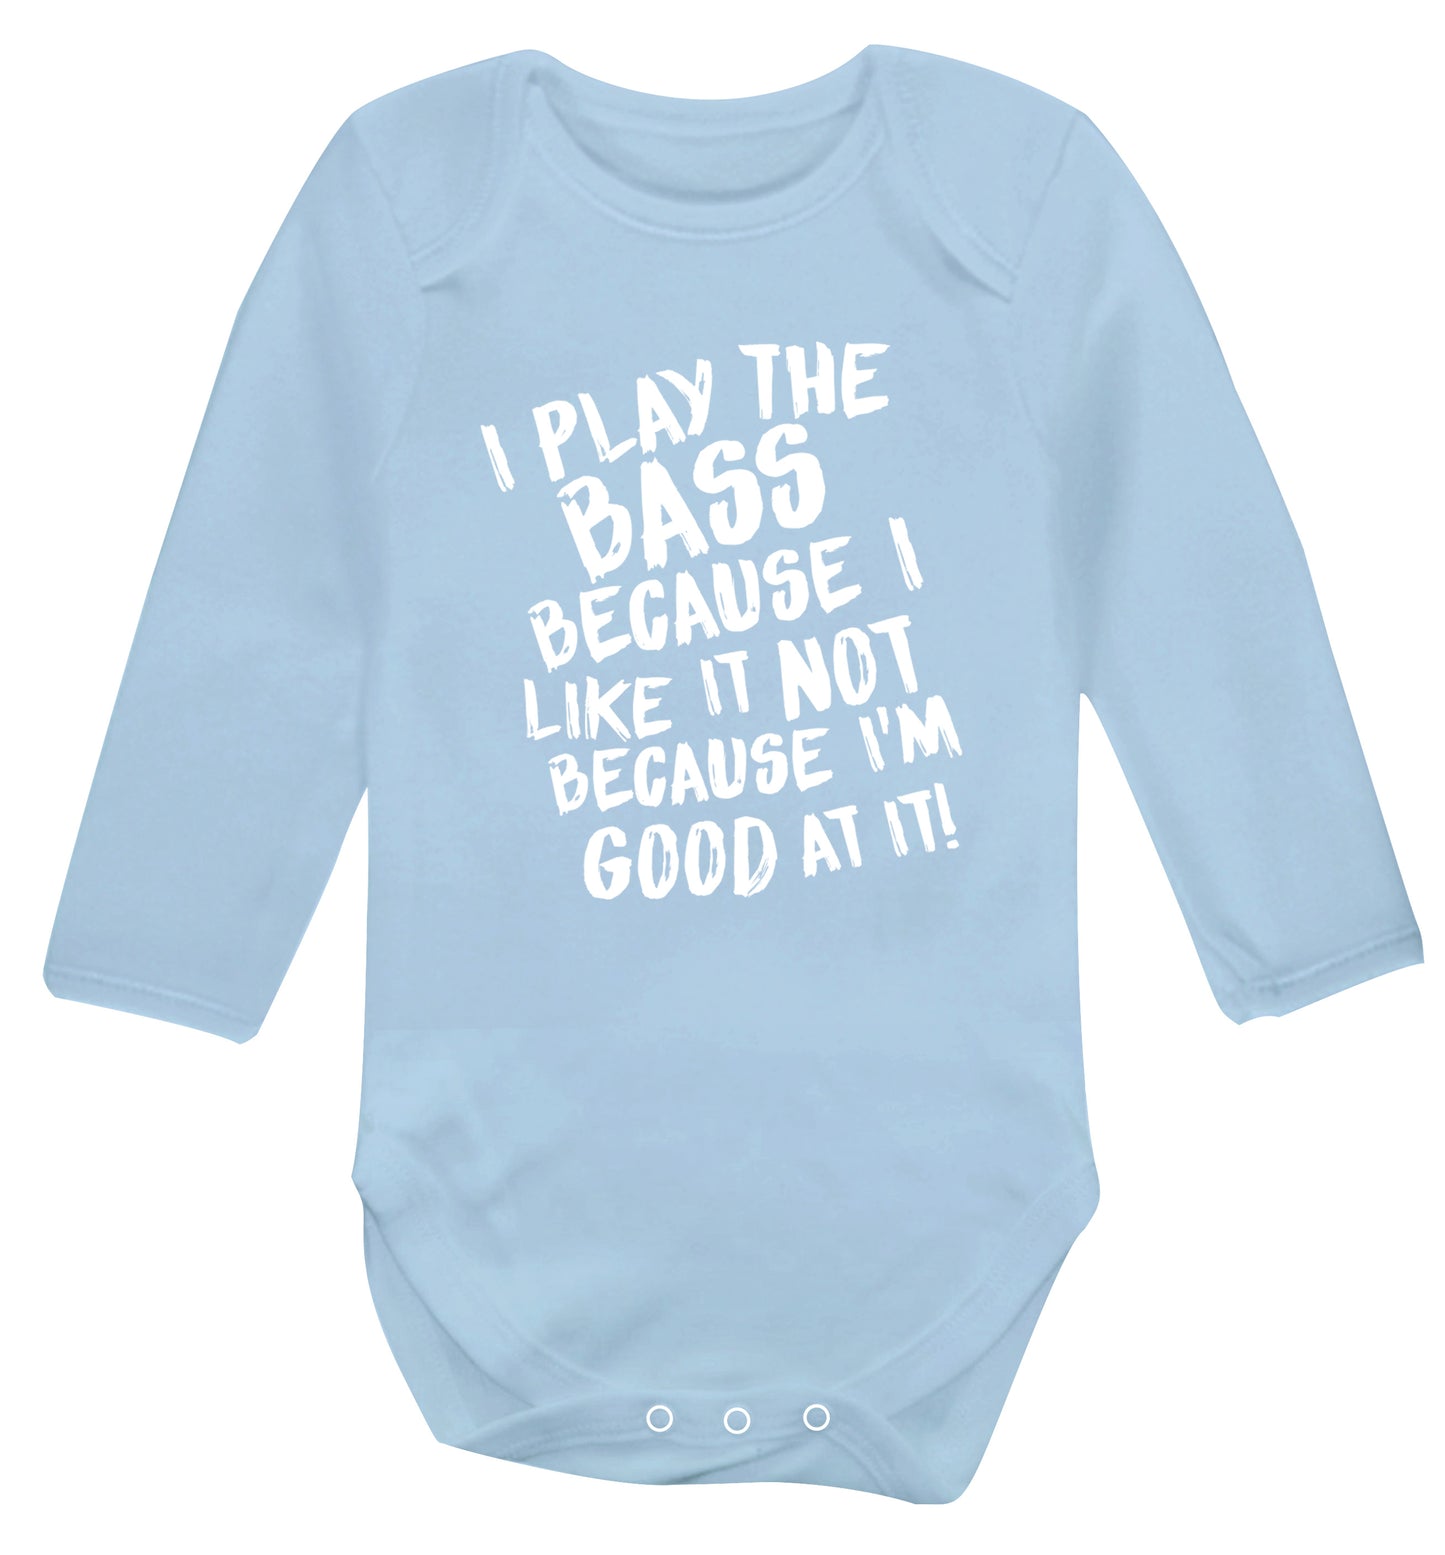 I play the bass because I like it not because I'm good at it Baby Vest long sleeved pale blue 6-12 months